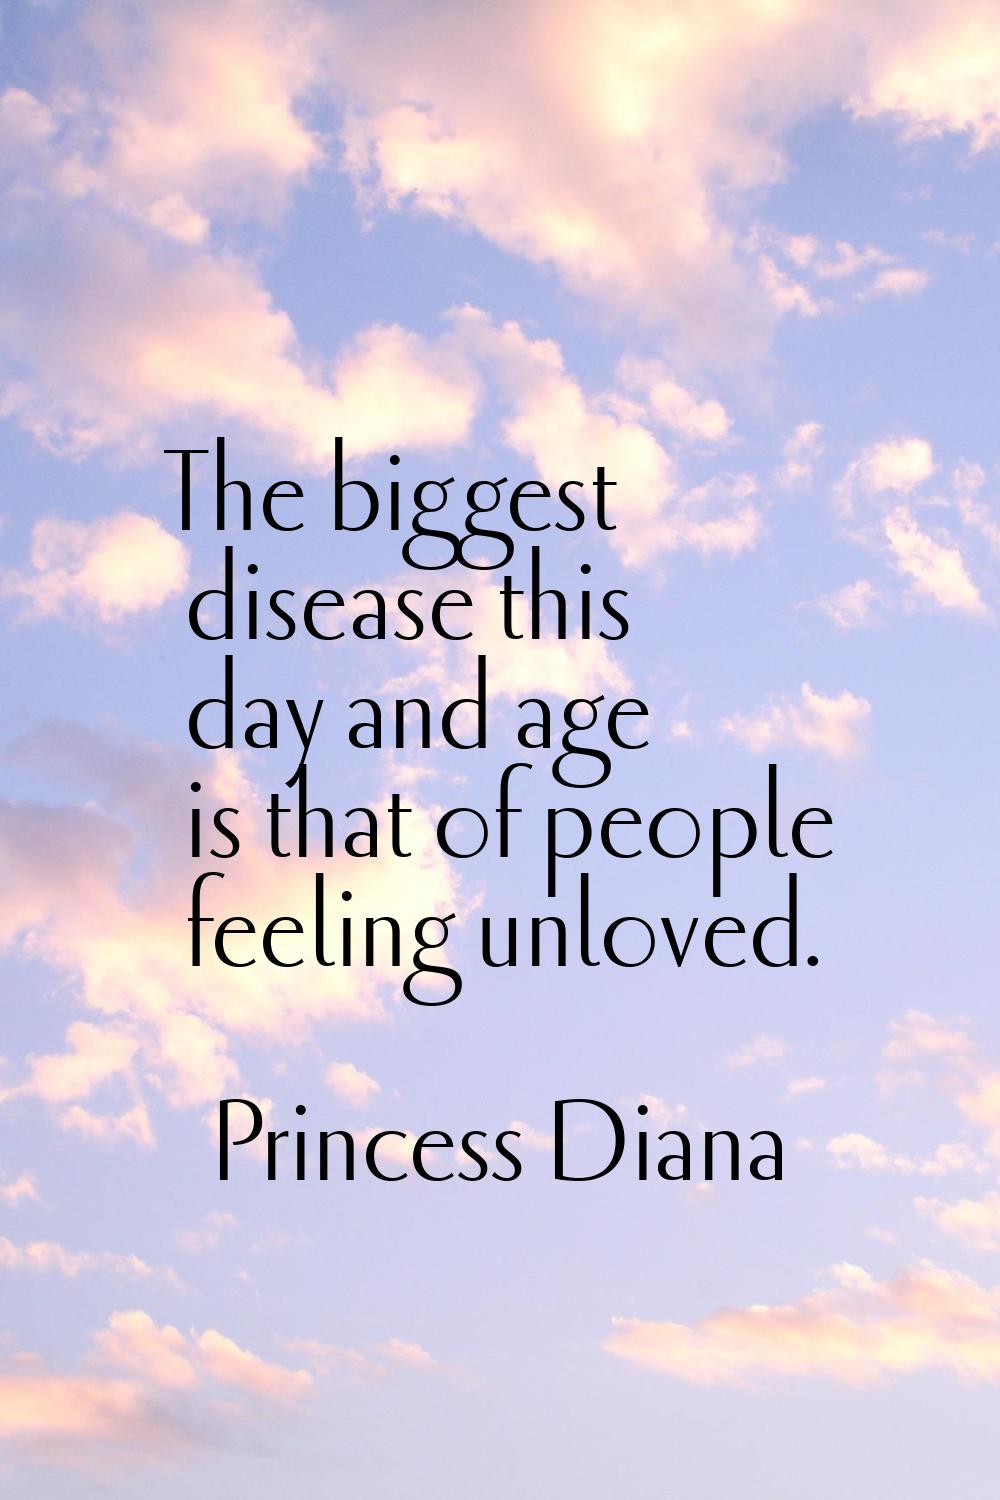 The biggest disease this day and age is that of people feeling unloved.